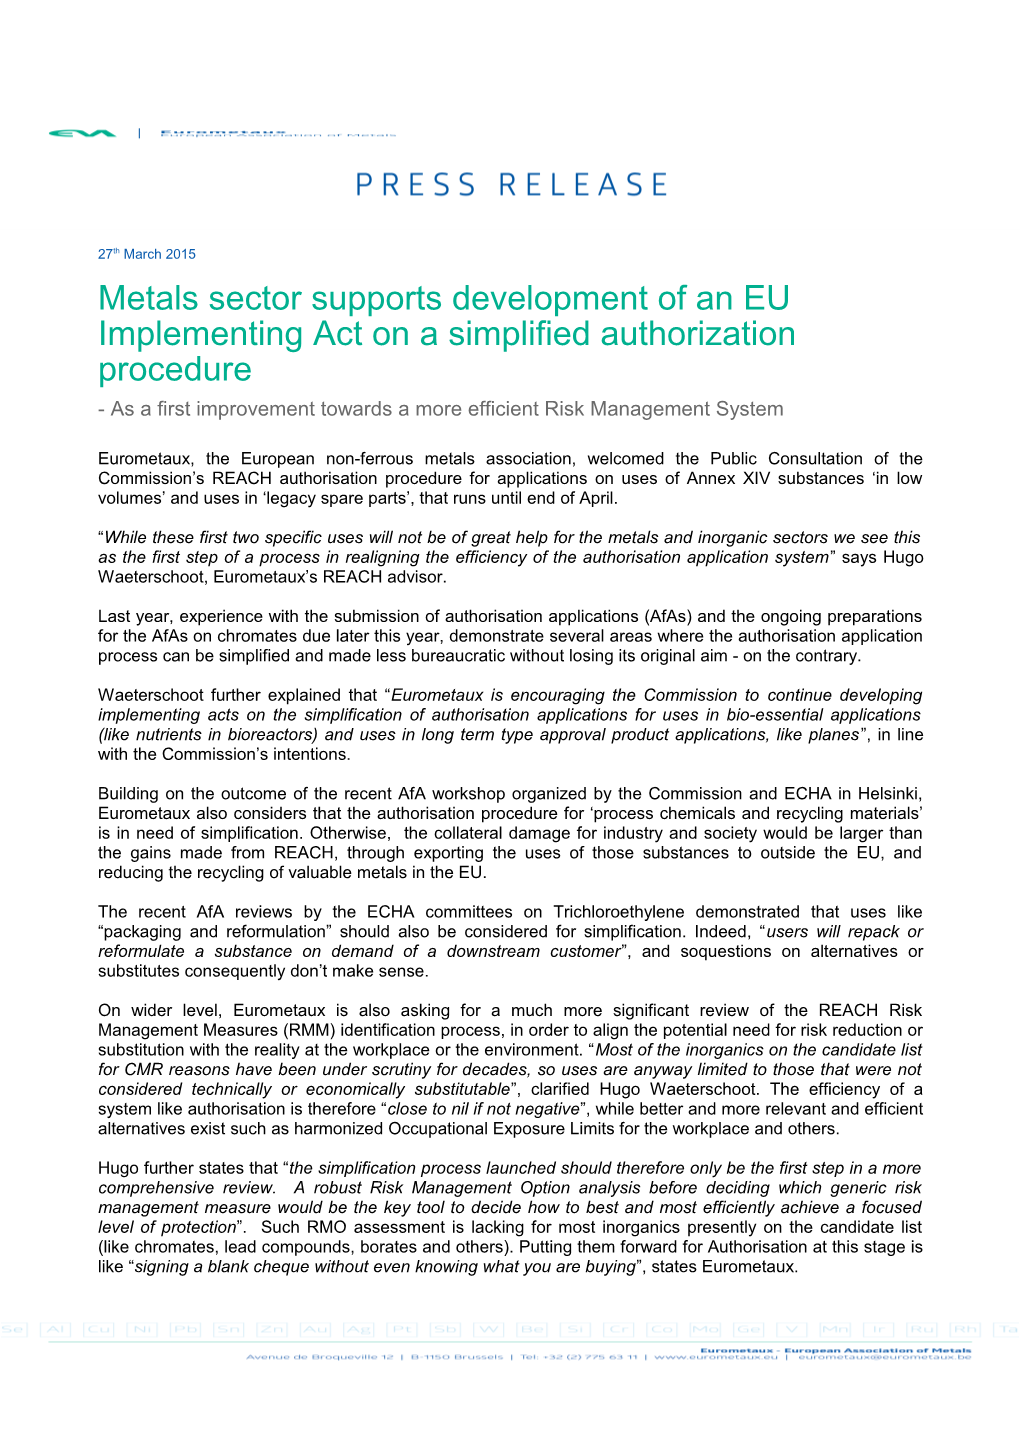 Metals Sector Supports Development of an EU Implementing Act on a Simplified Authorization